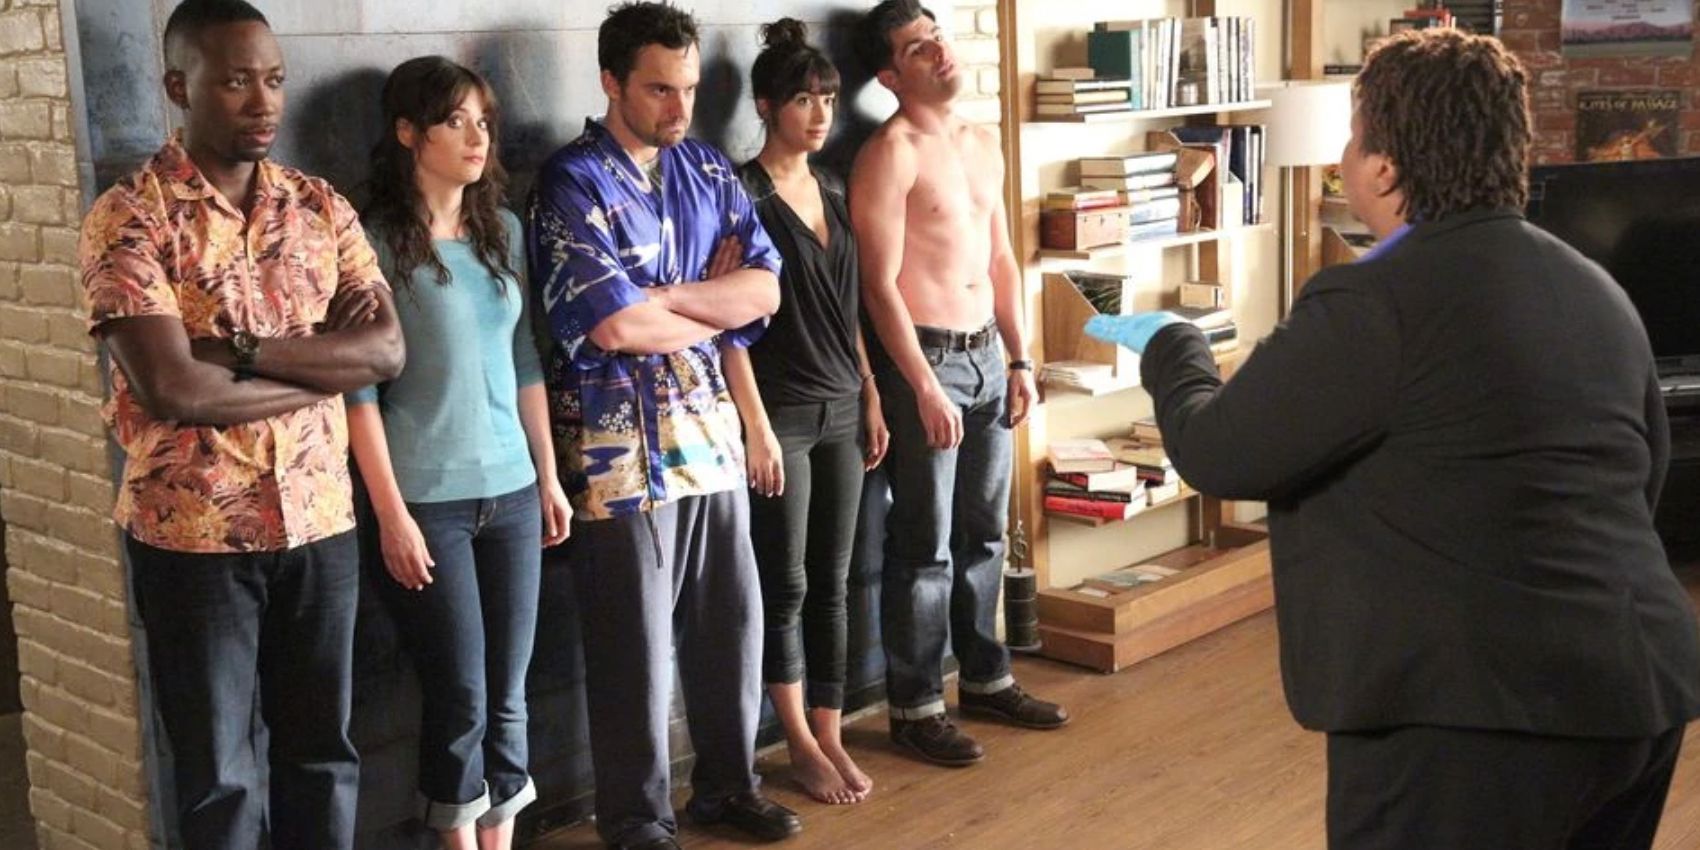 The roommates line up against the wall while a police officer talks to them in the New Girl episode Background Check